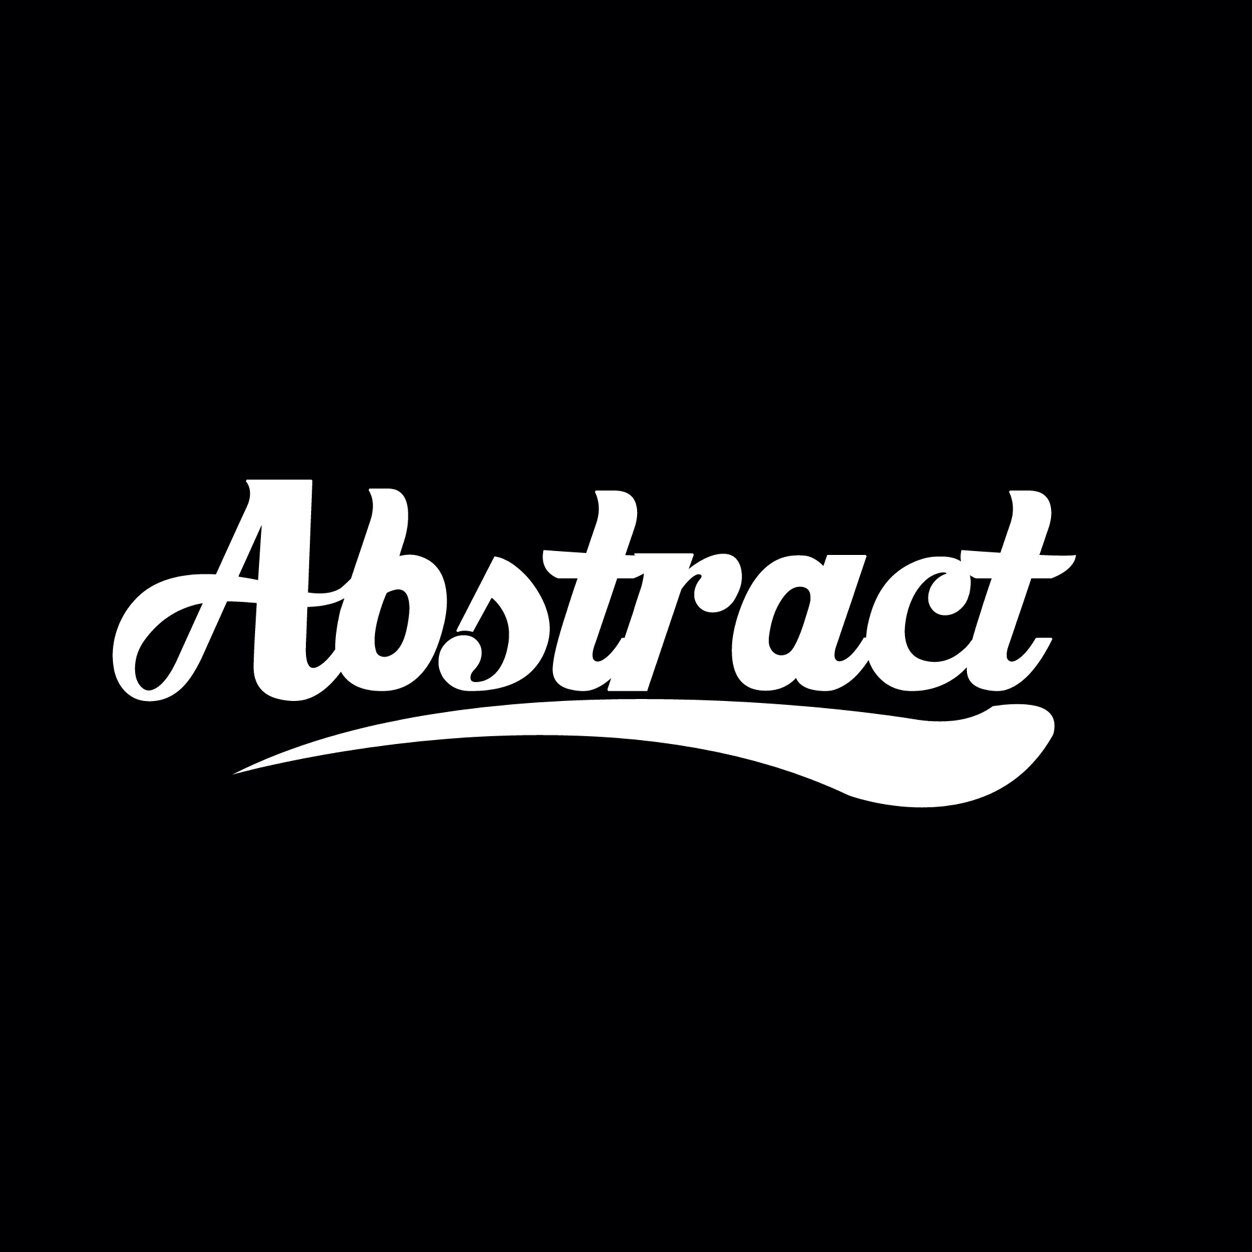 Team Account for the Hip-Hop Artist Abstract- Follow @TheTrueAbstract Join the team #ATeamWorldwide